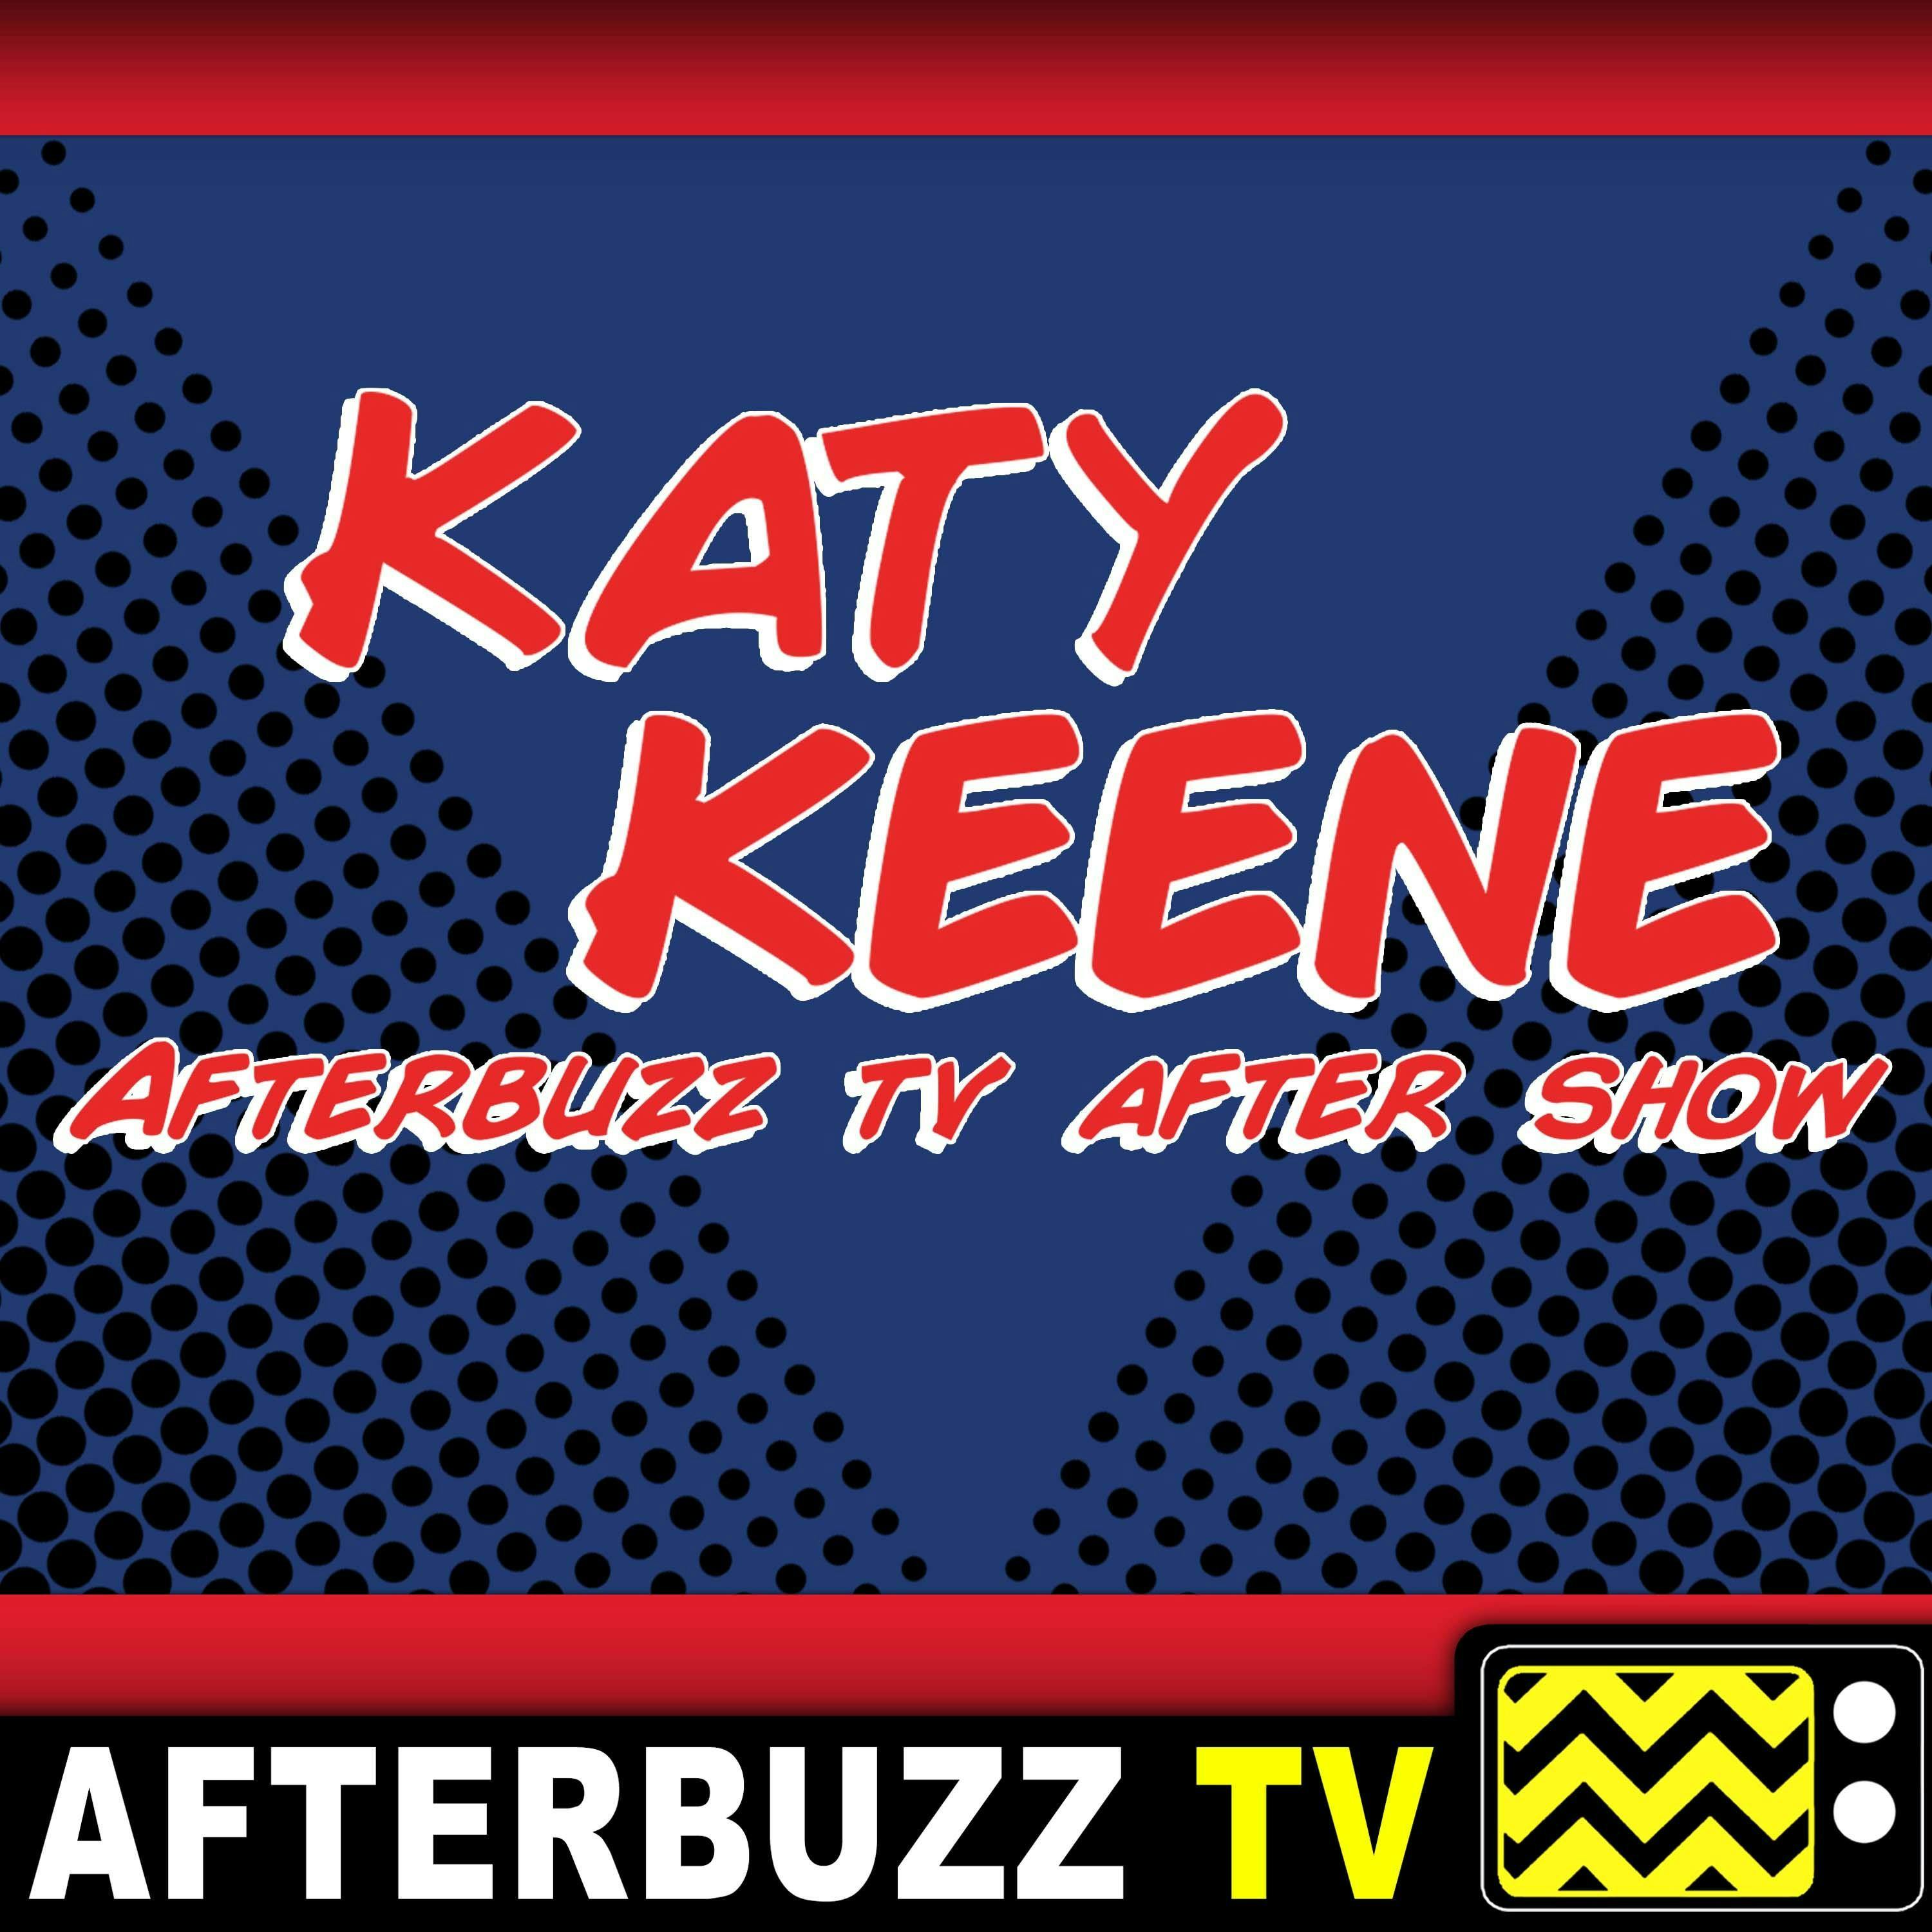 Katy Keene S1 E13 Recap & After Show: All Good Things Must Come To An End Or Do They?…